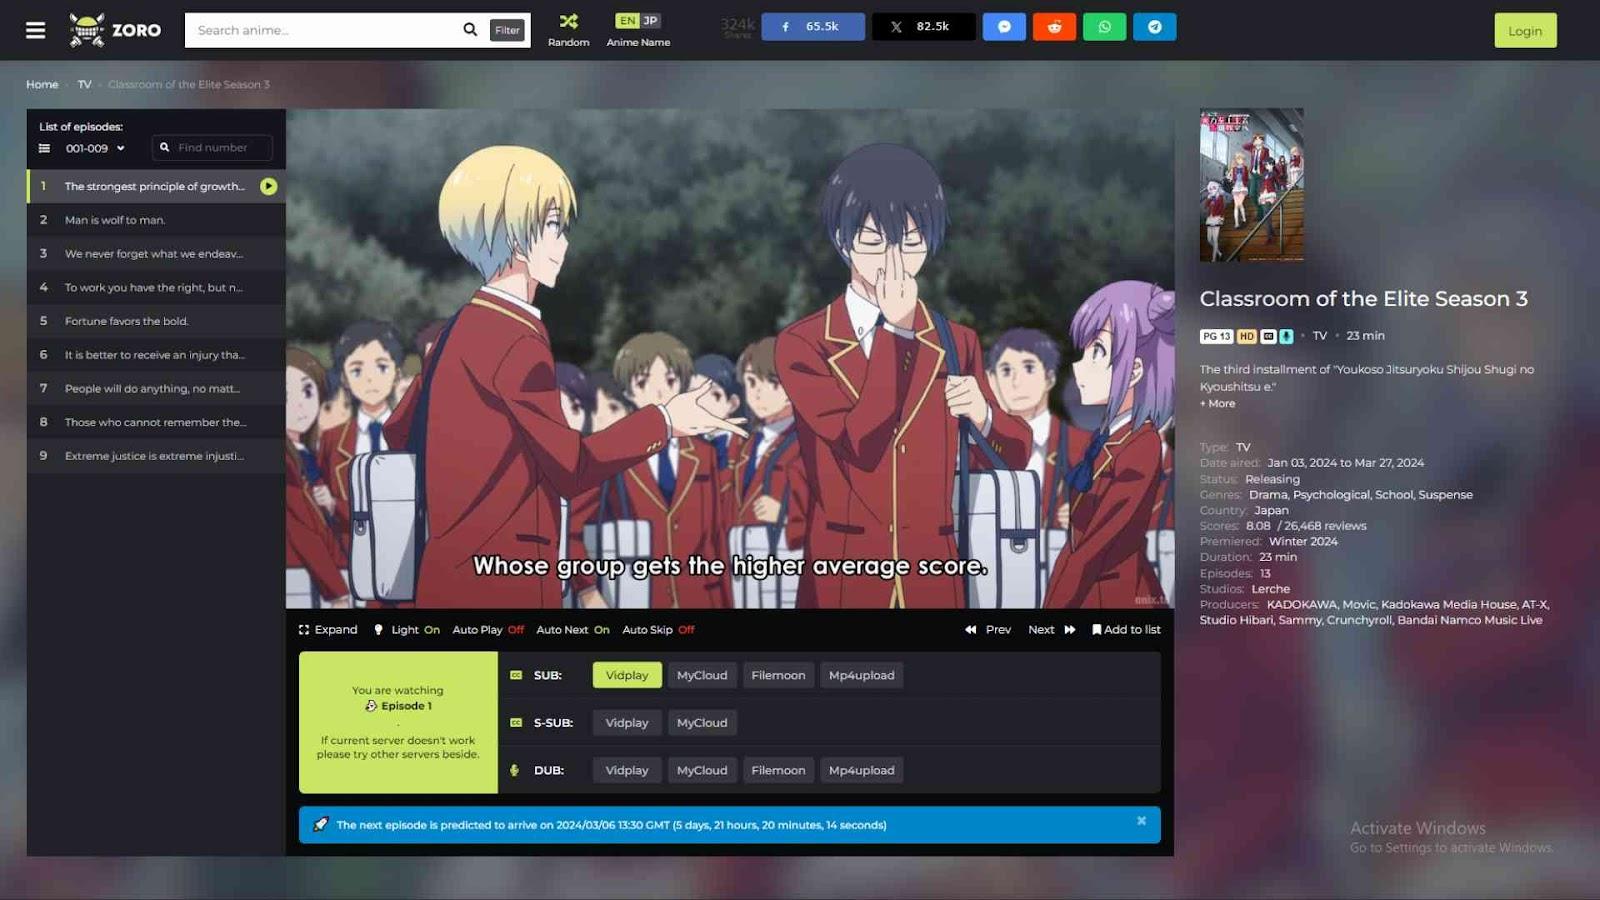 How to Stream Anime from ZoroAnime?